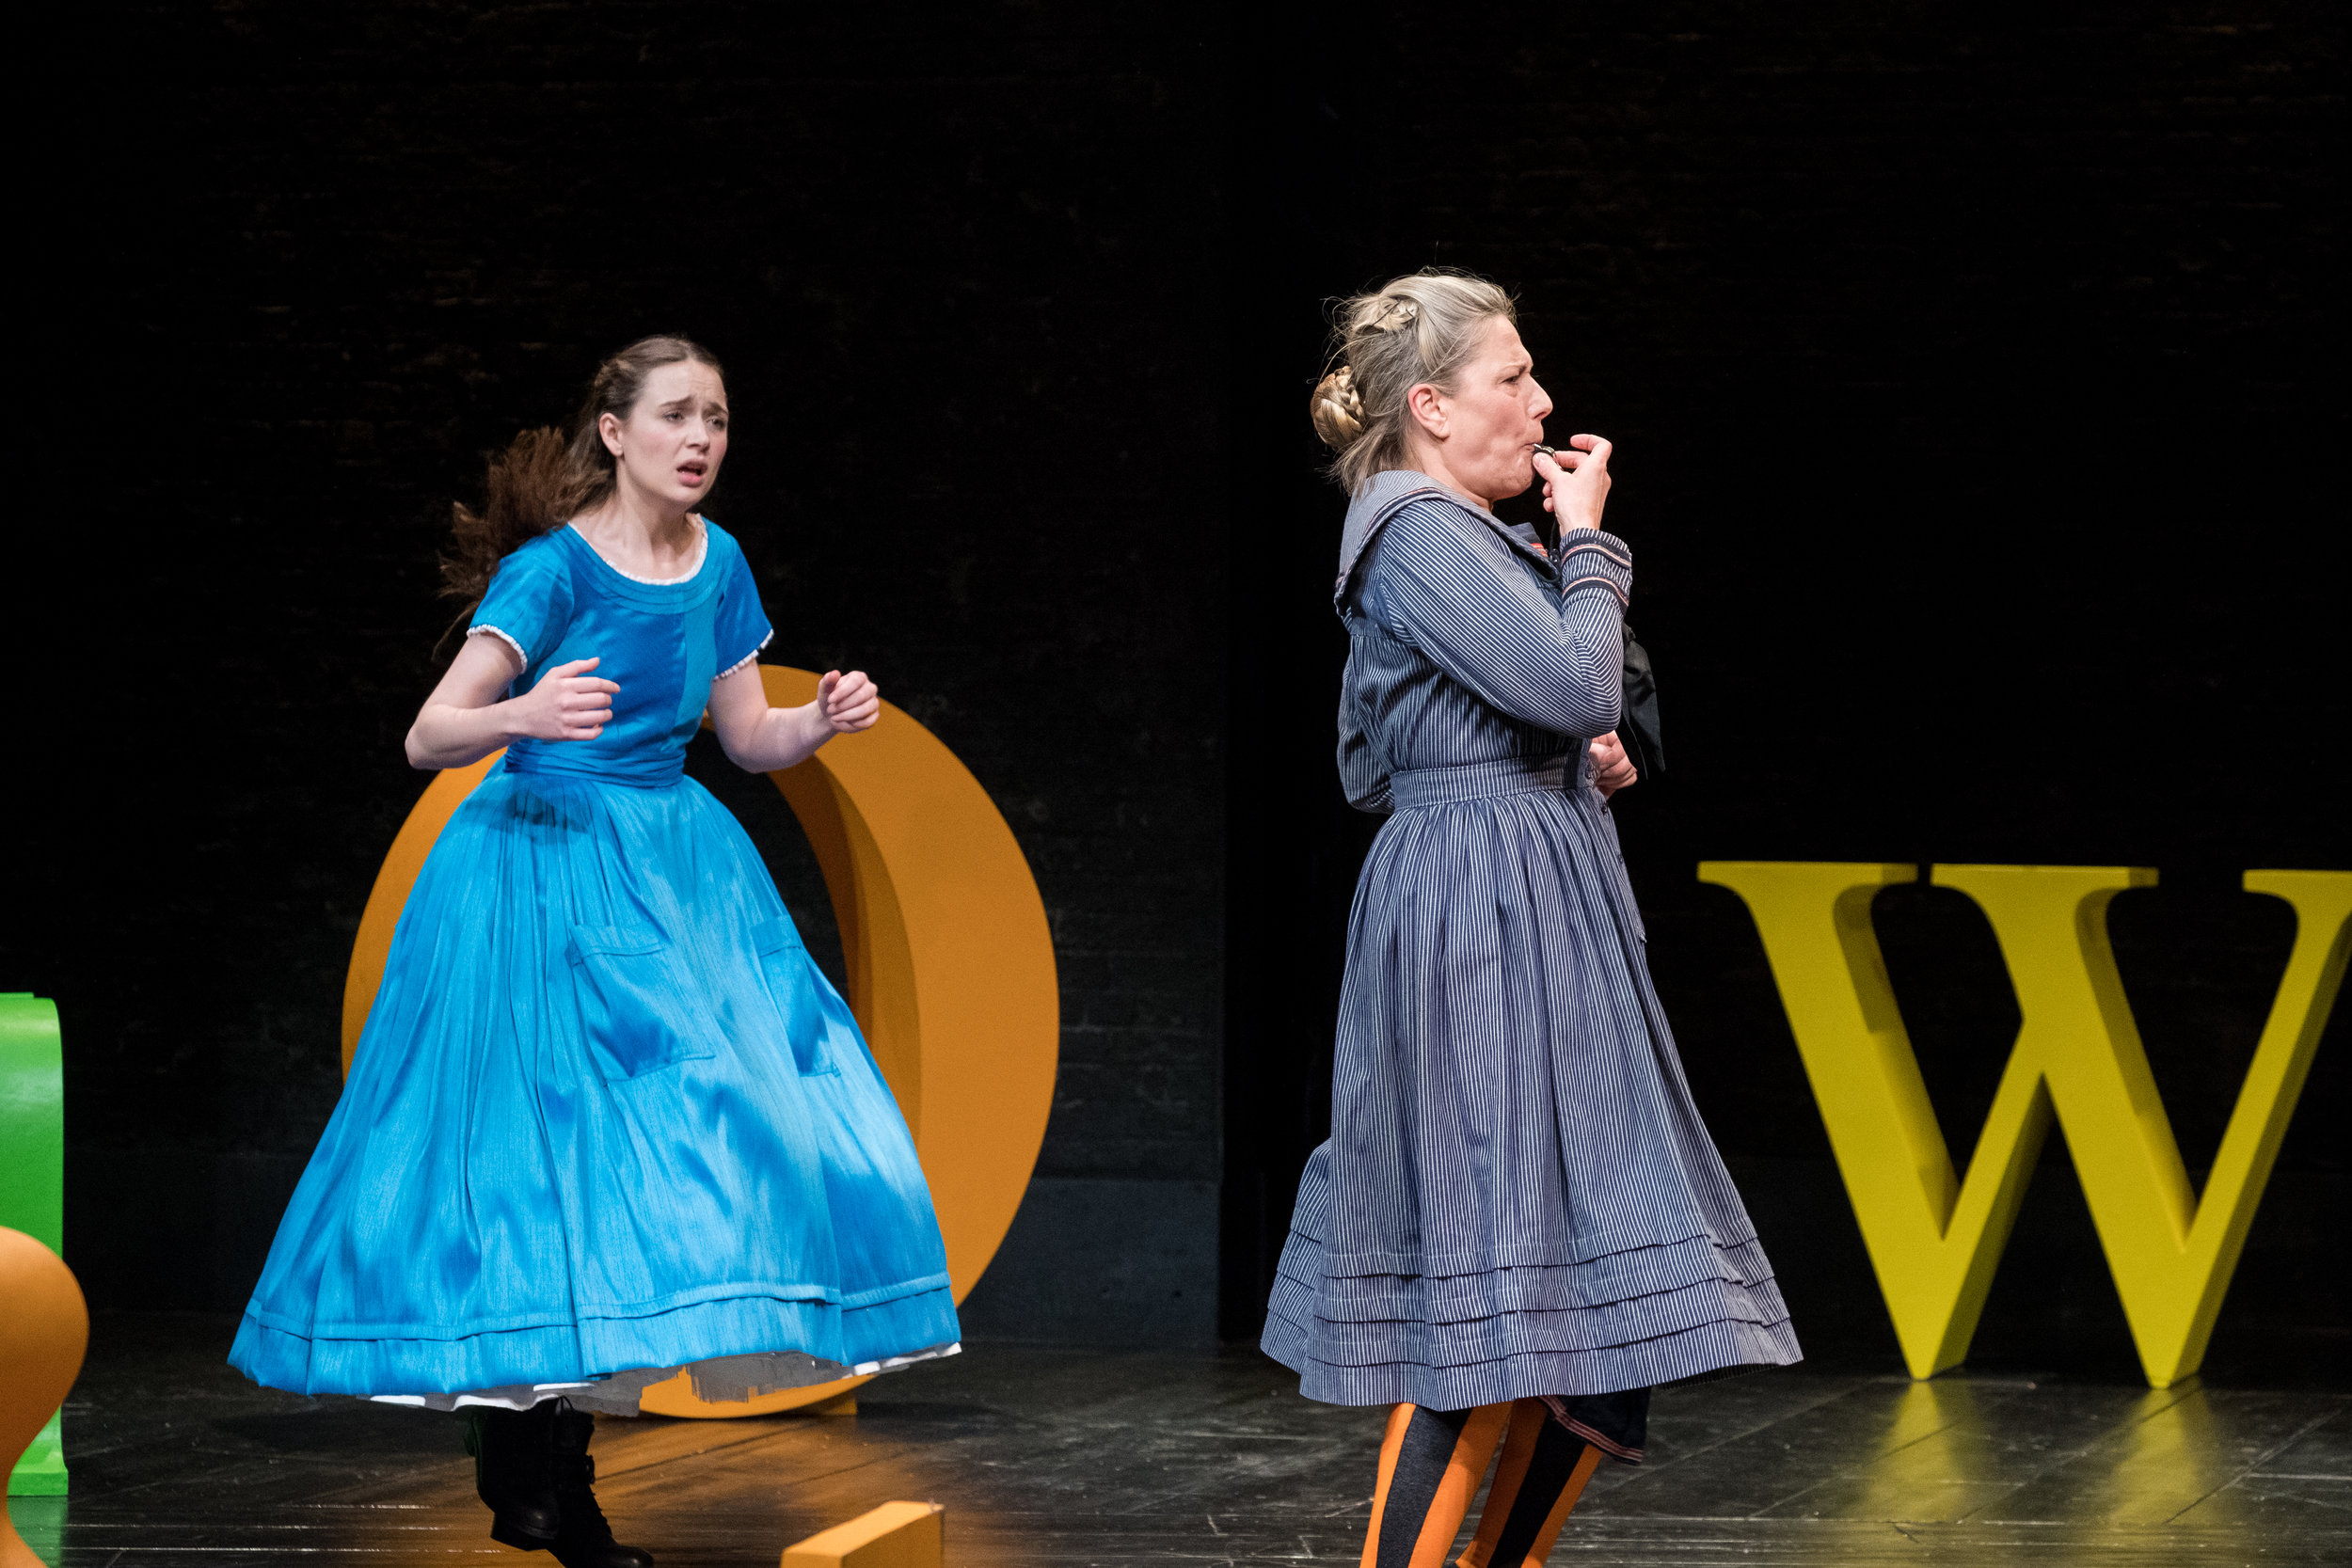  Rebecca Birch &amp; Charlotte Gorton in Alice in Wonderland, Storyhouse, composed by Jude Obermüller (photo by Mark McNulty) 